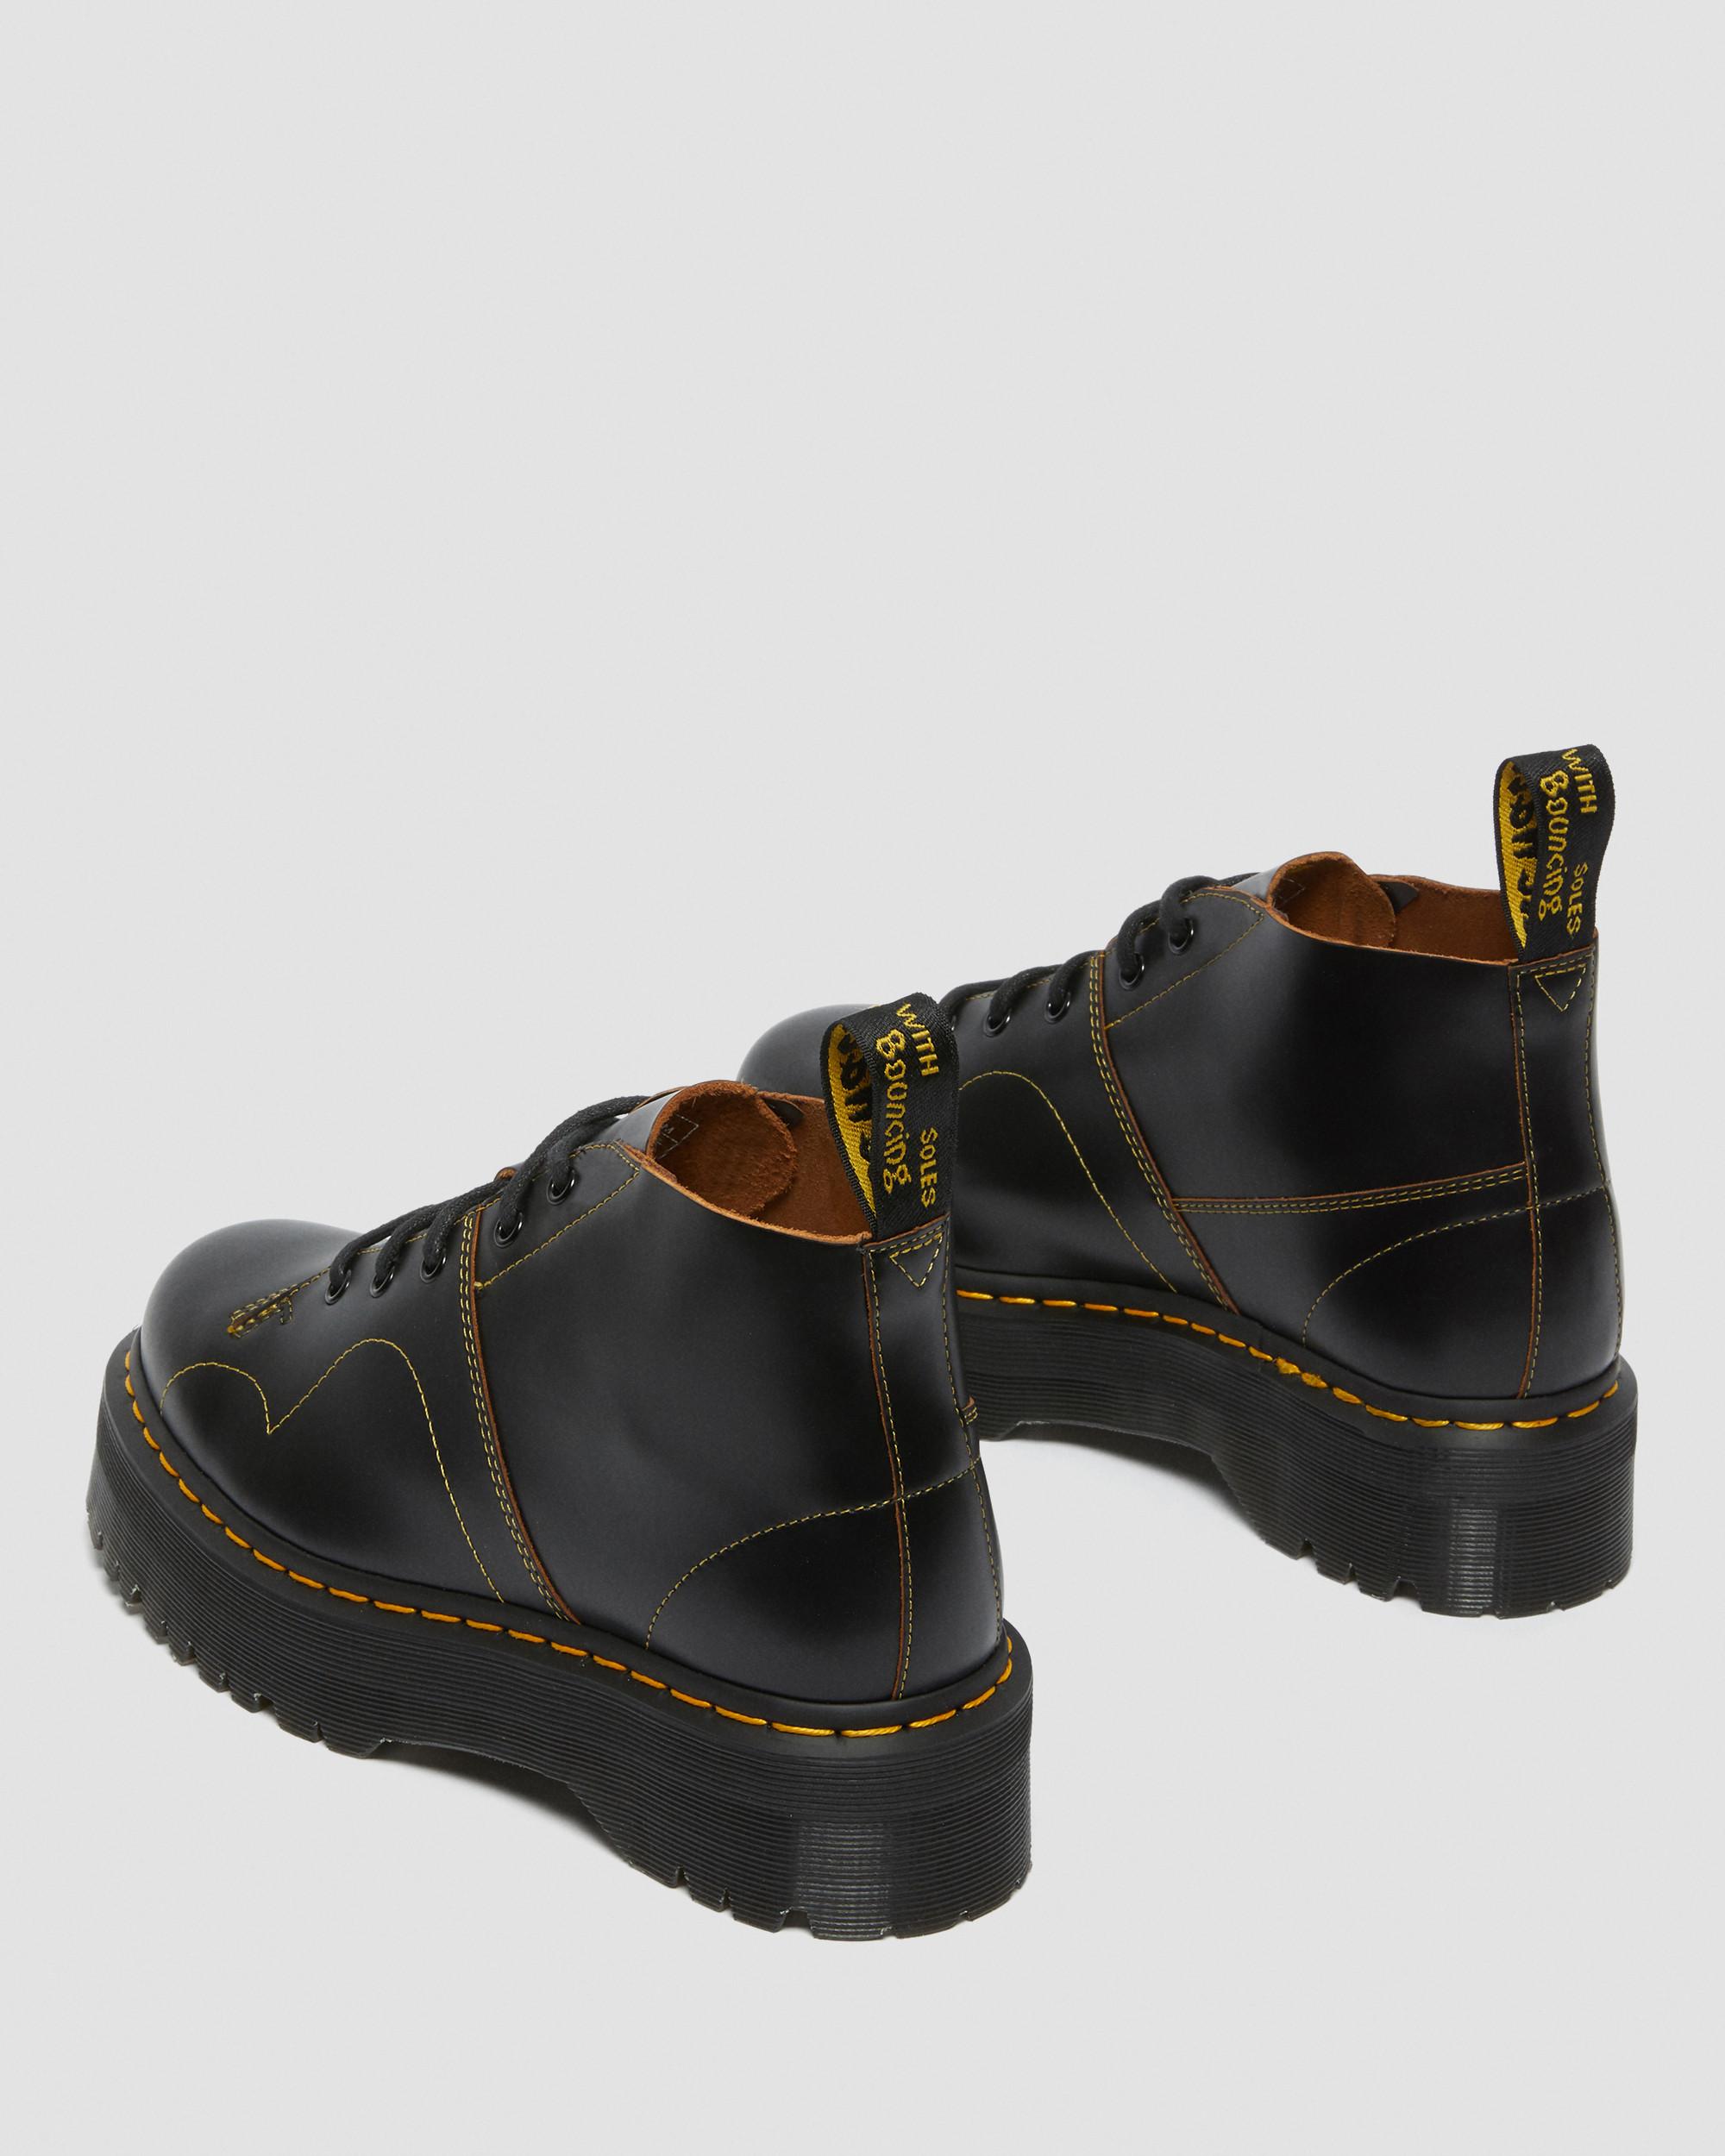 Dr Martens Church Quad Outfit | tunersread.com